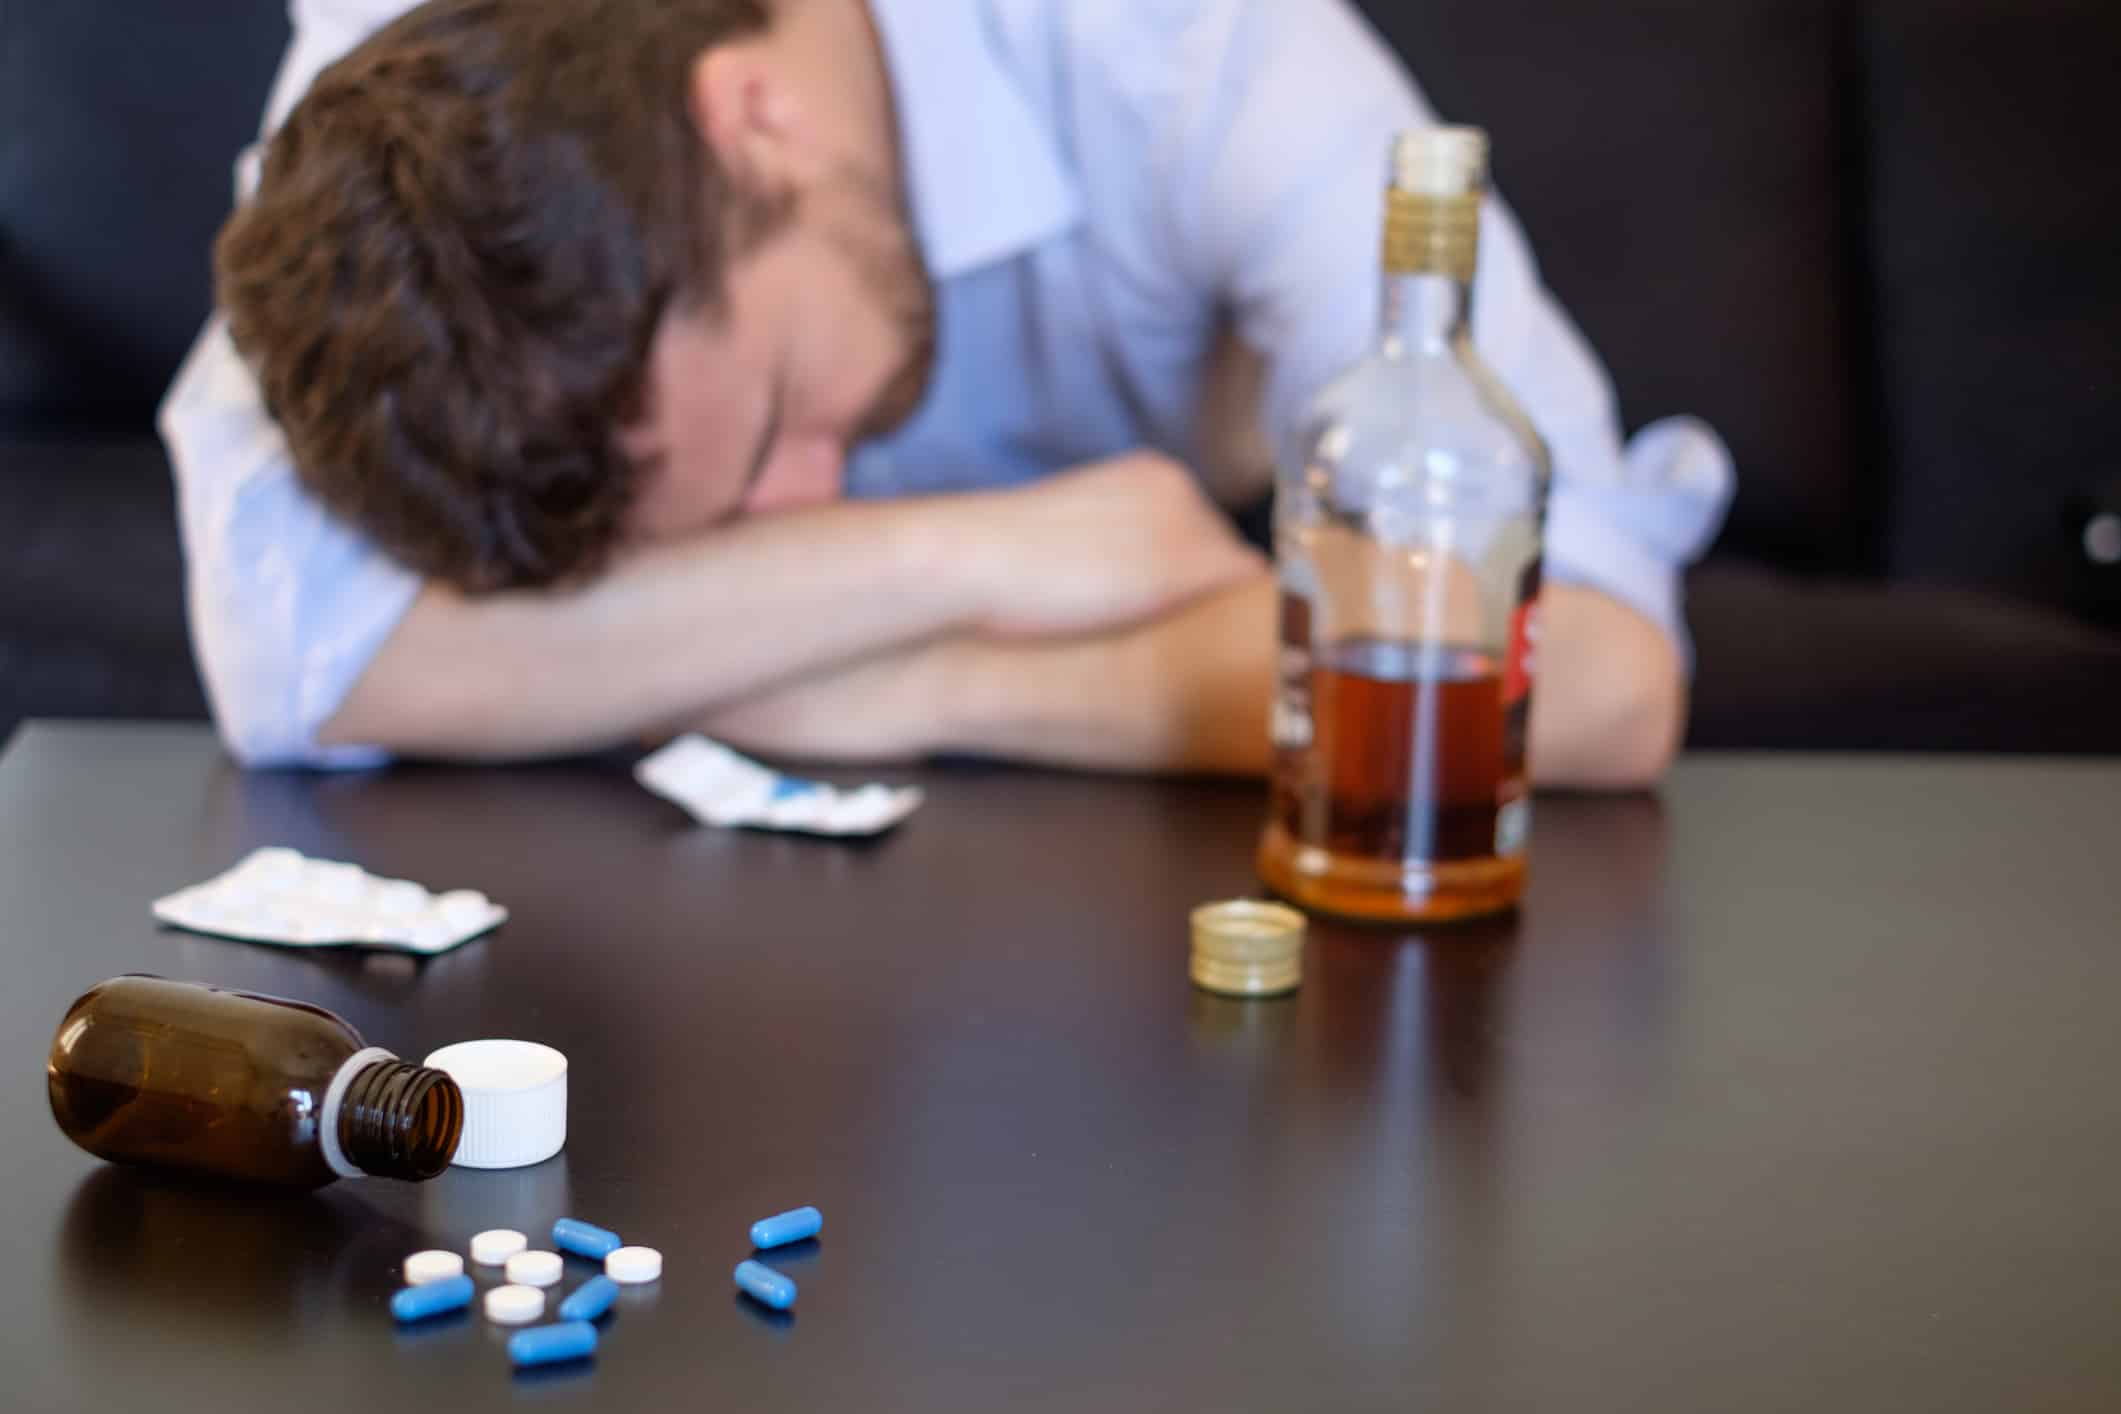 Depressed man mixing alcohol and pills